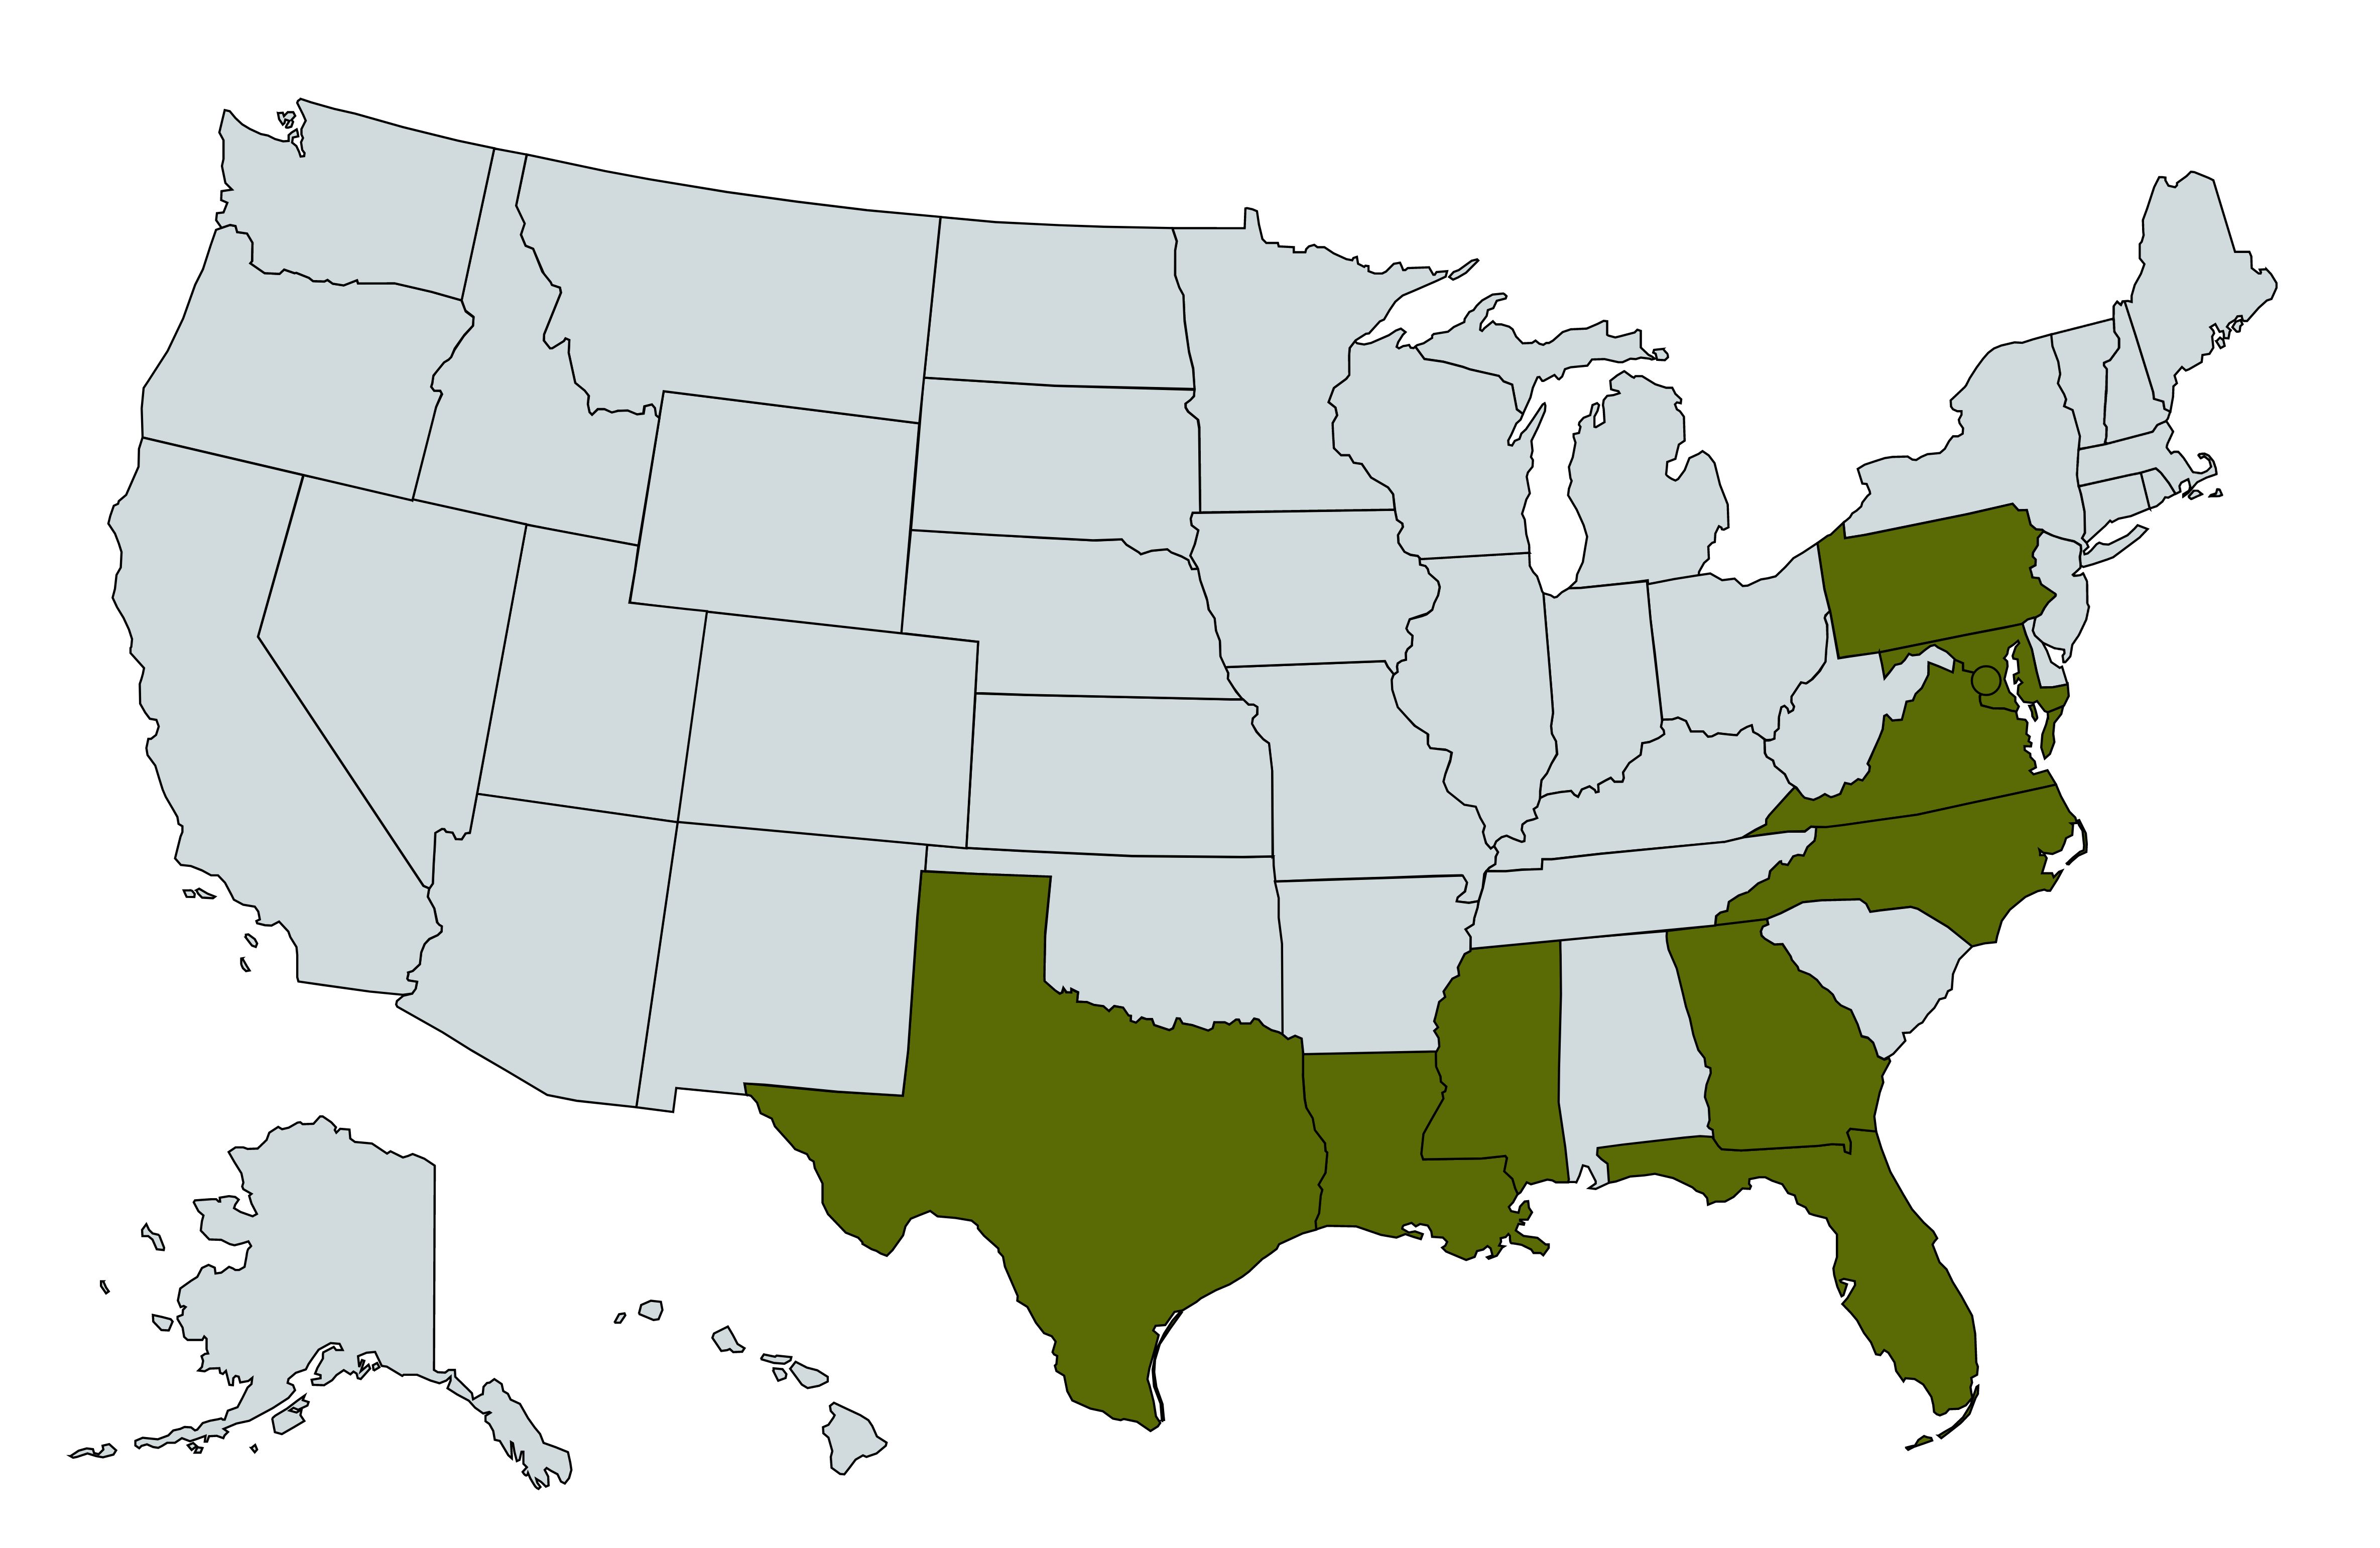 Geographical distribution of KEYV (shaded states) in the United States. The map was drawn based on the isolation or detection of KEYV in mosquitoes and vertebrate hosts from published data. 